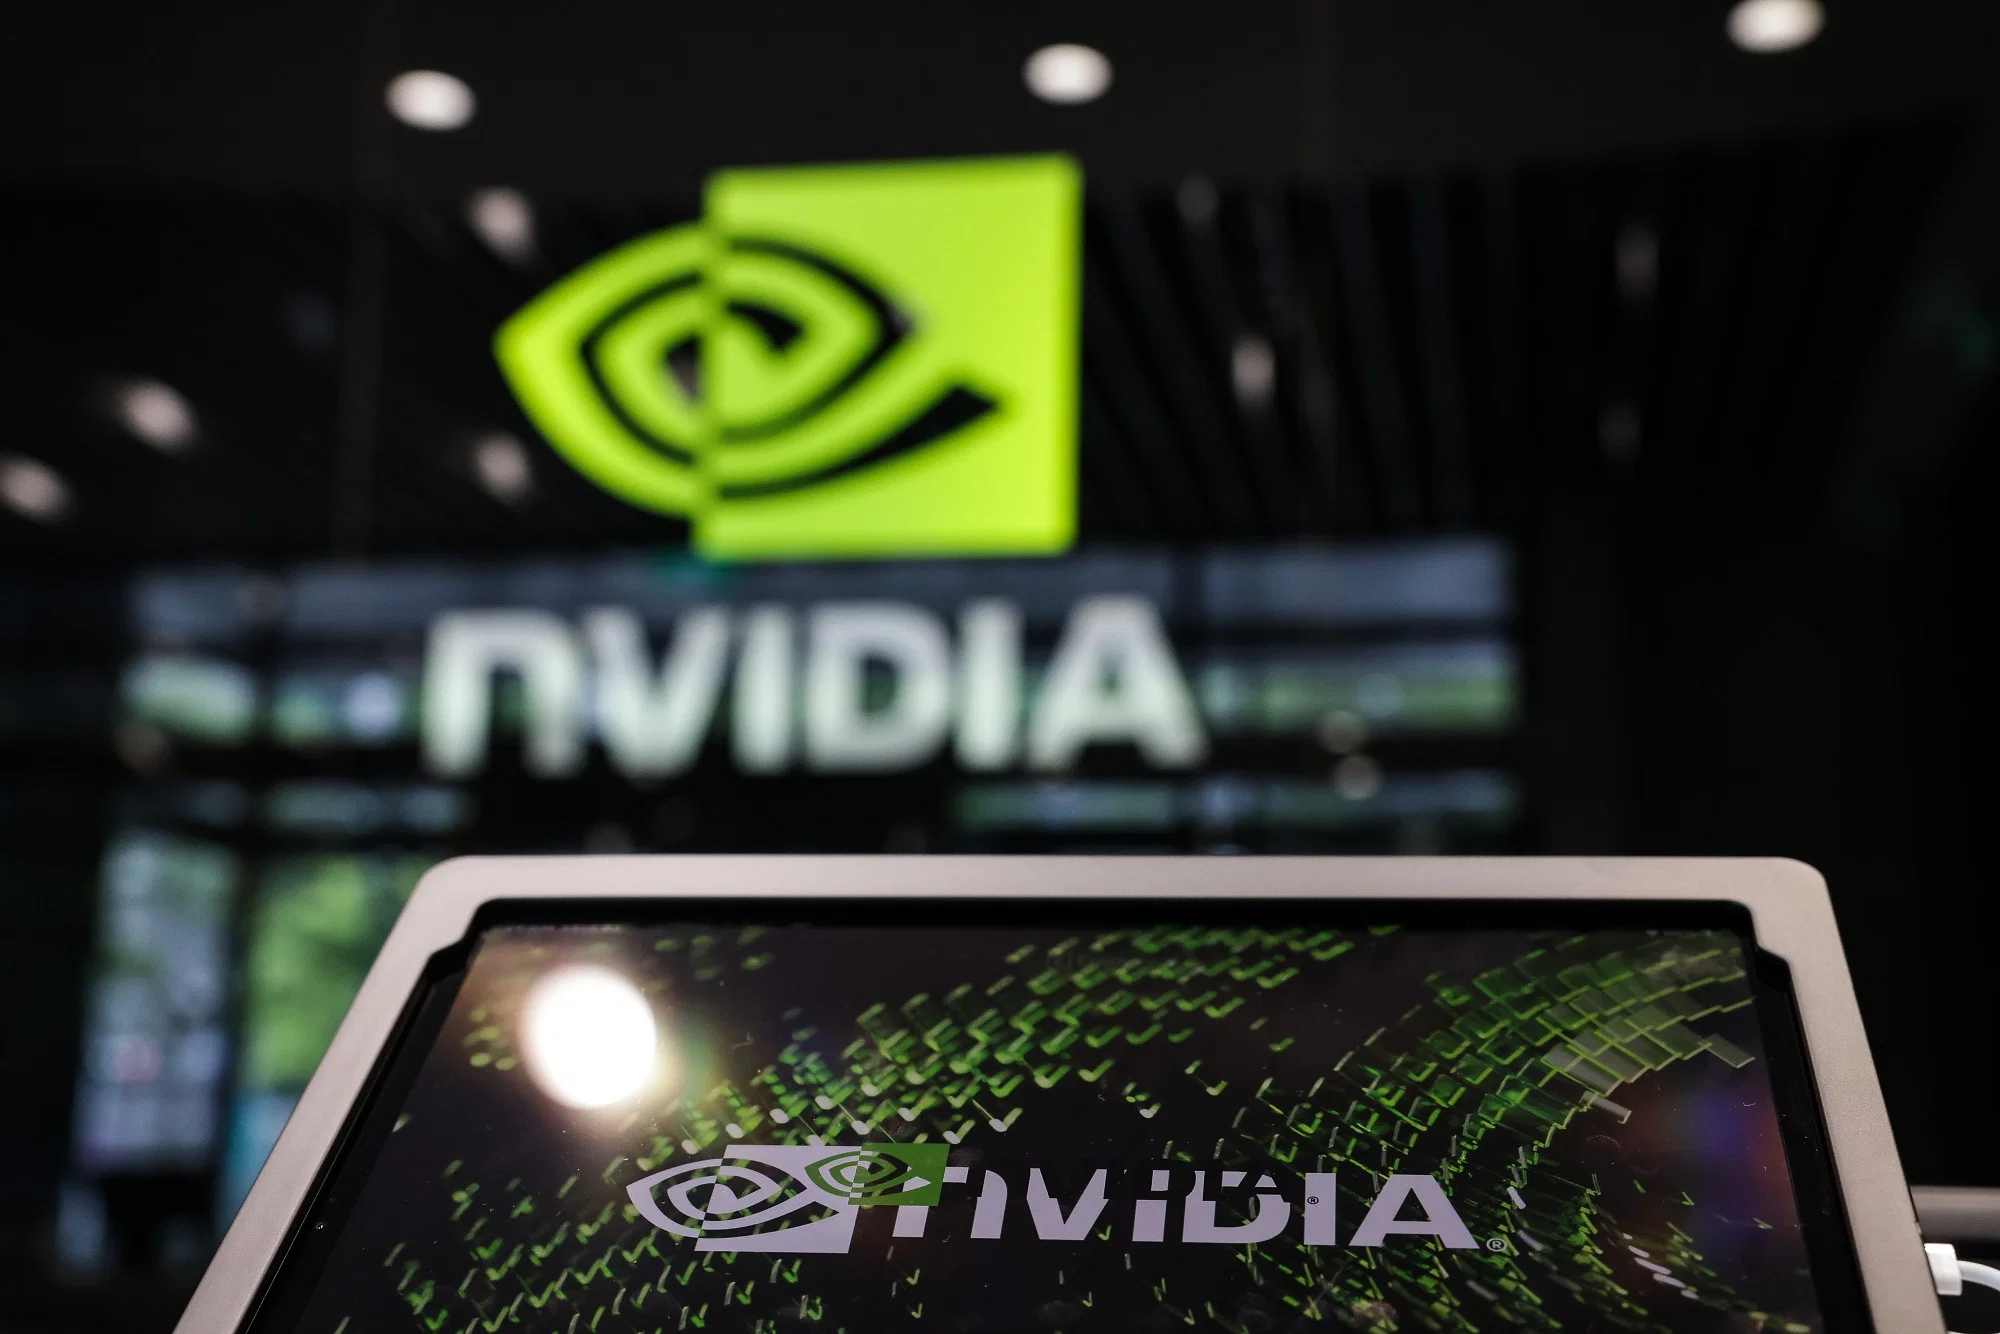 Nvidia takes over from Tesla as the market shifts focus from electric vehicles to artificial intelligence